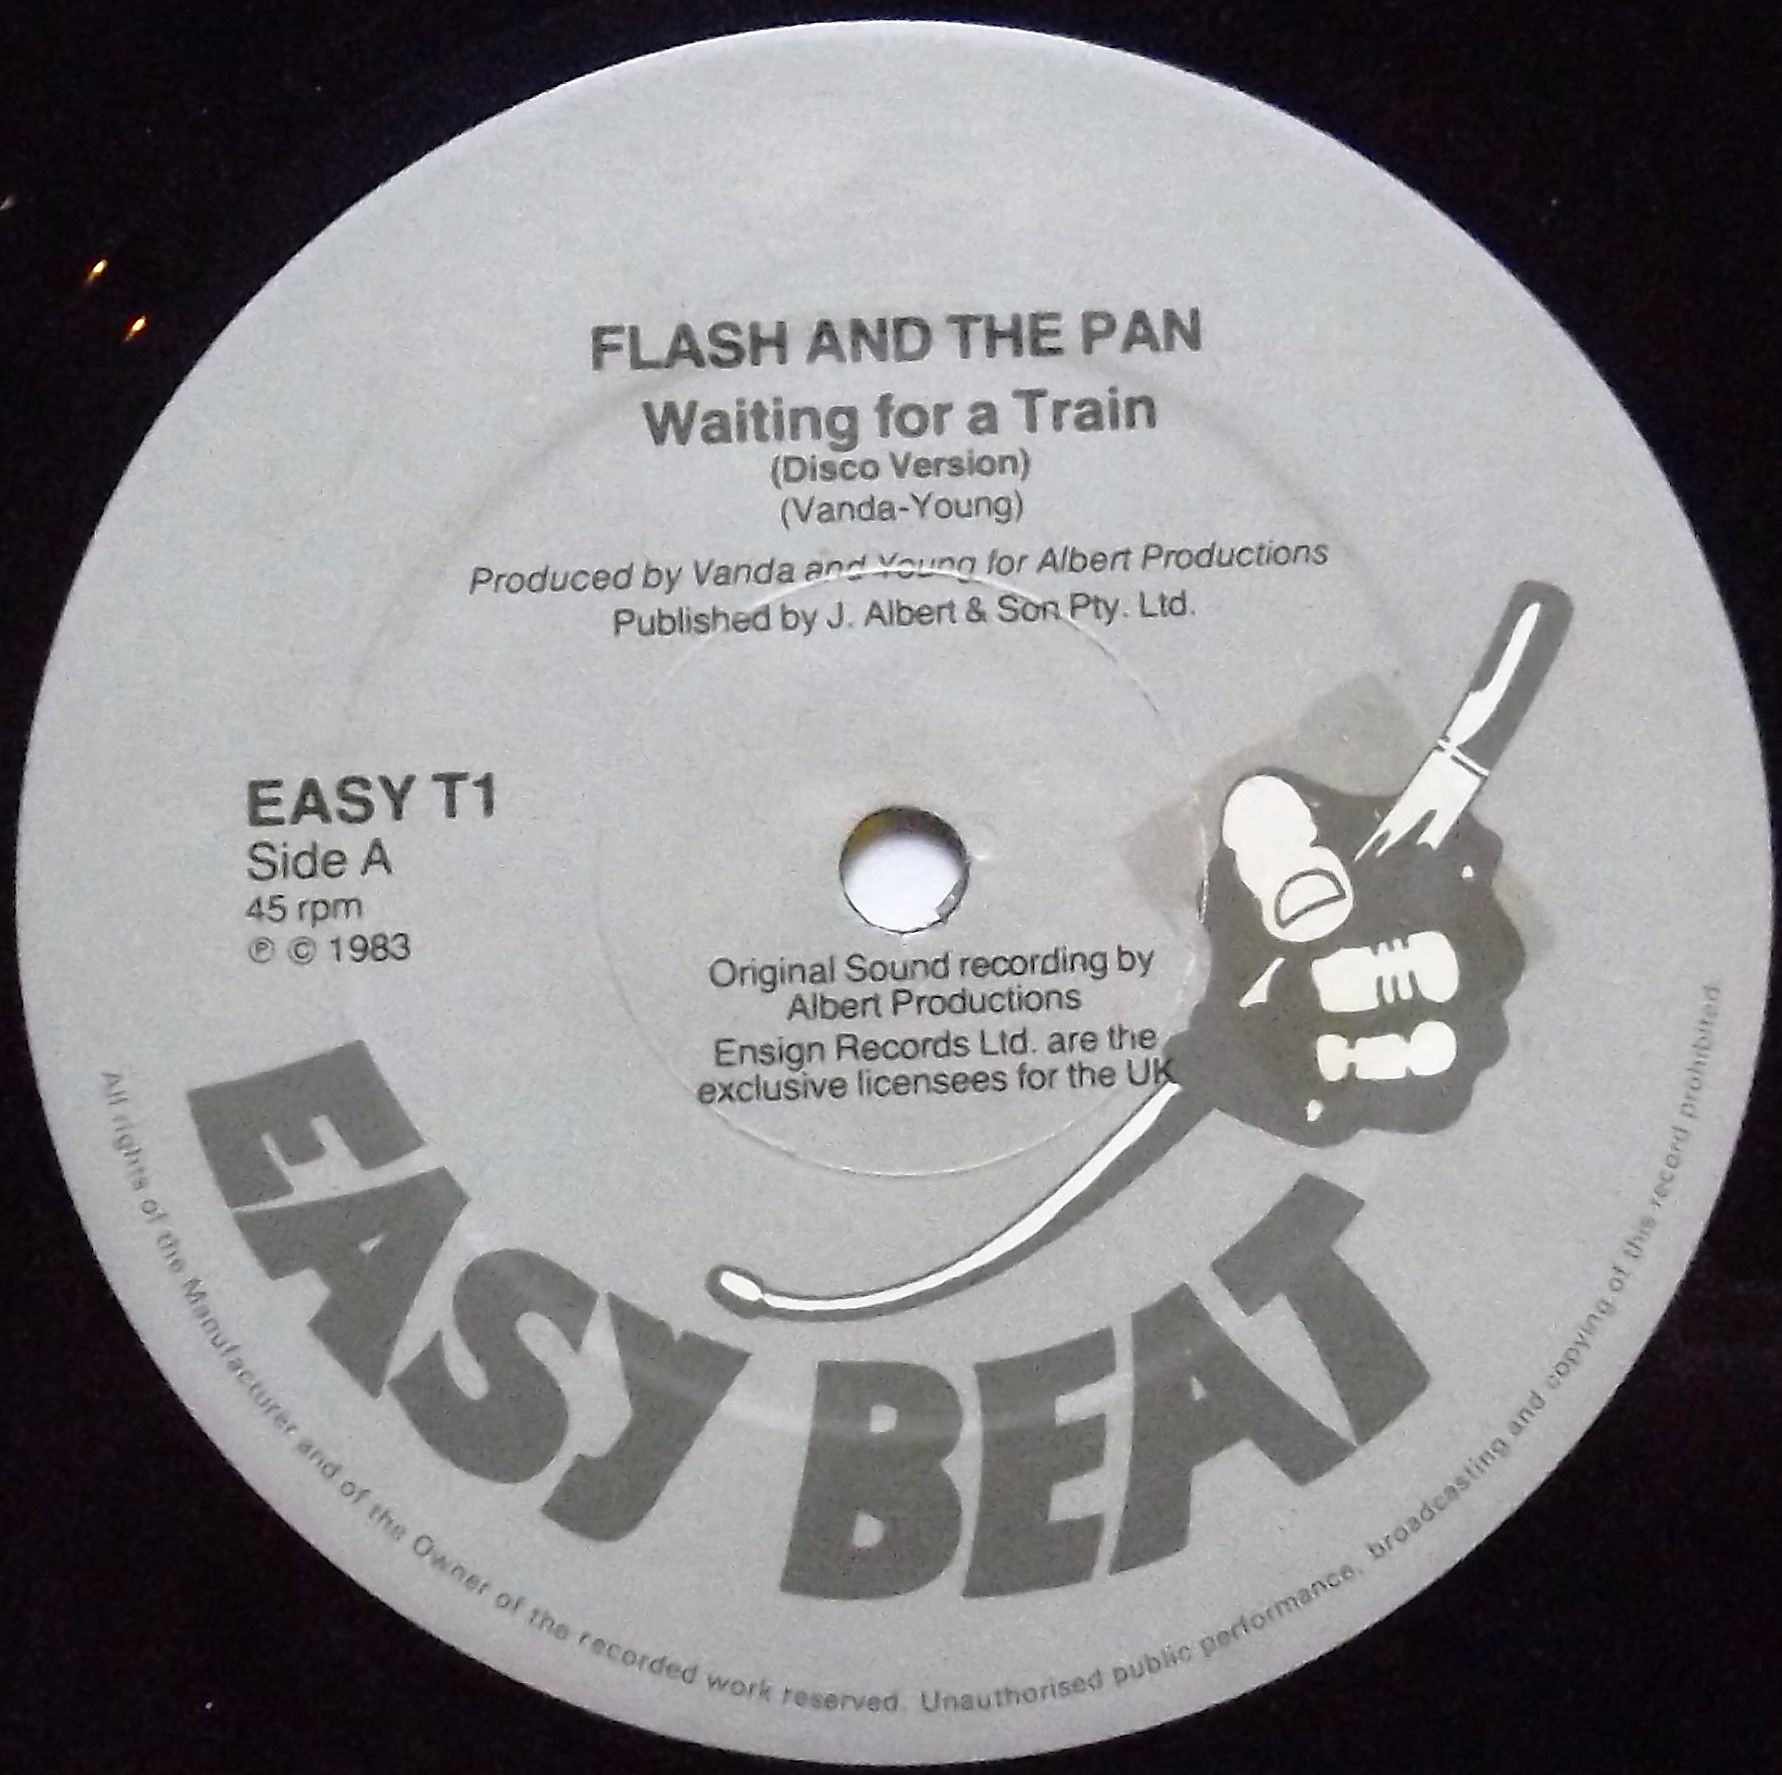 Flash and the pan. Flash and the Pan waiting for a Train. Flash and the Pan 1978. Flash & the Pan "headlines".